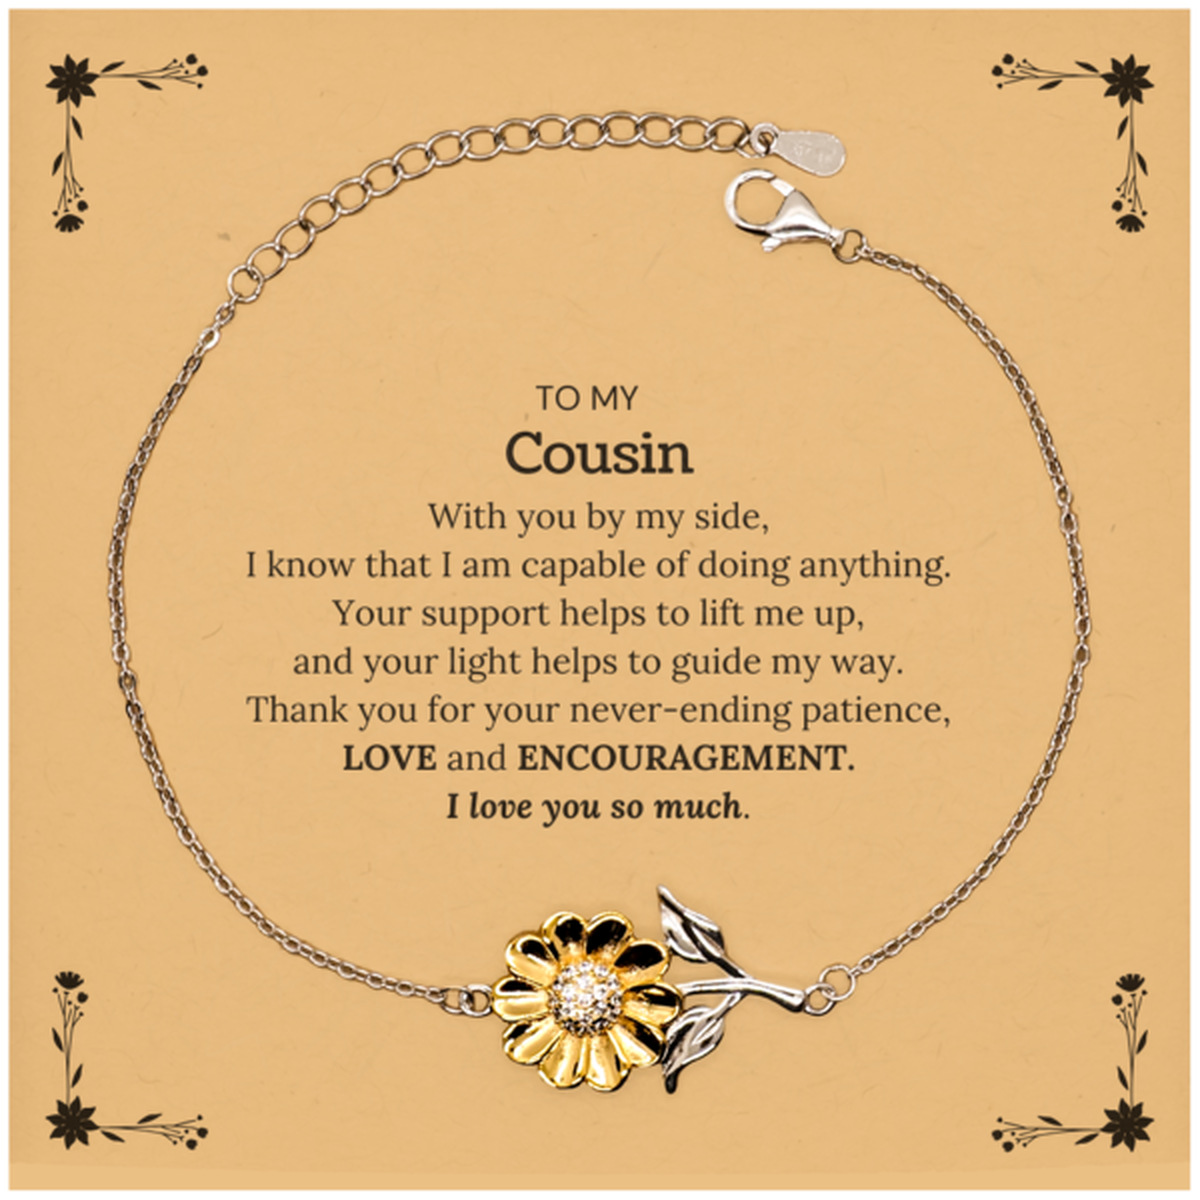 Appreciation Cousin Sunflower Bracelet Gifts, To My Cousin Birthday Christmas Wedding Keepsake Gifts for Cousin With you by my side, I know that I am capable of doing anything. I love you so much